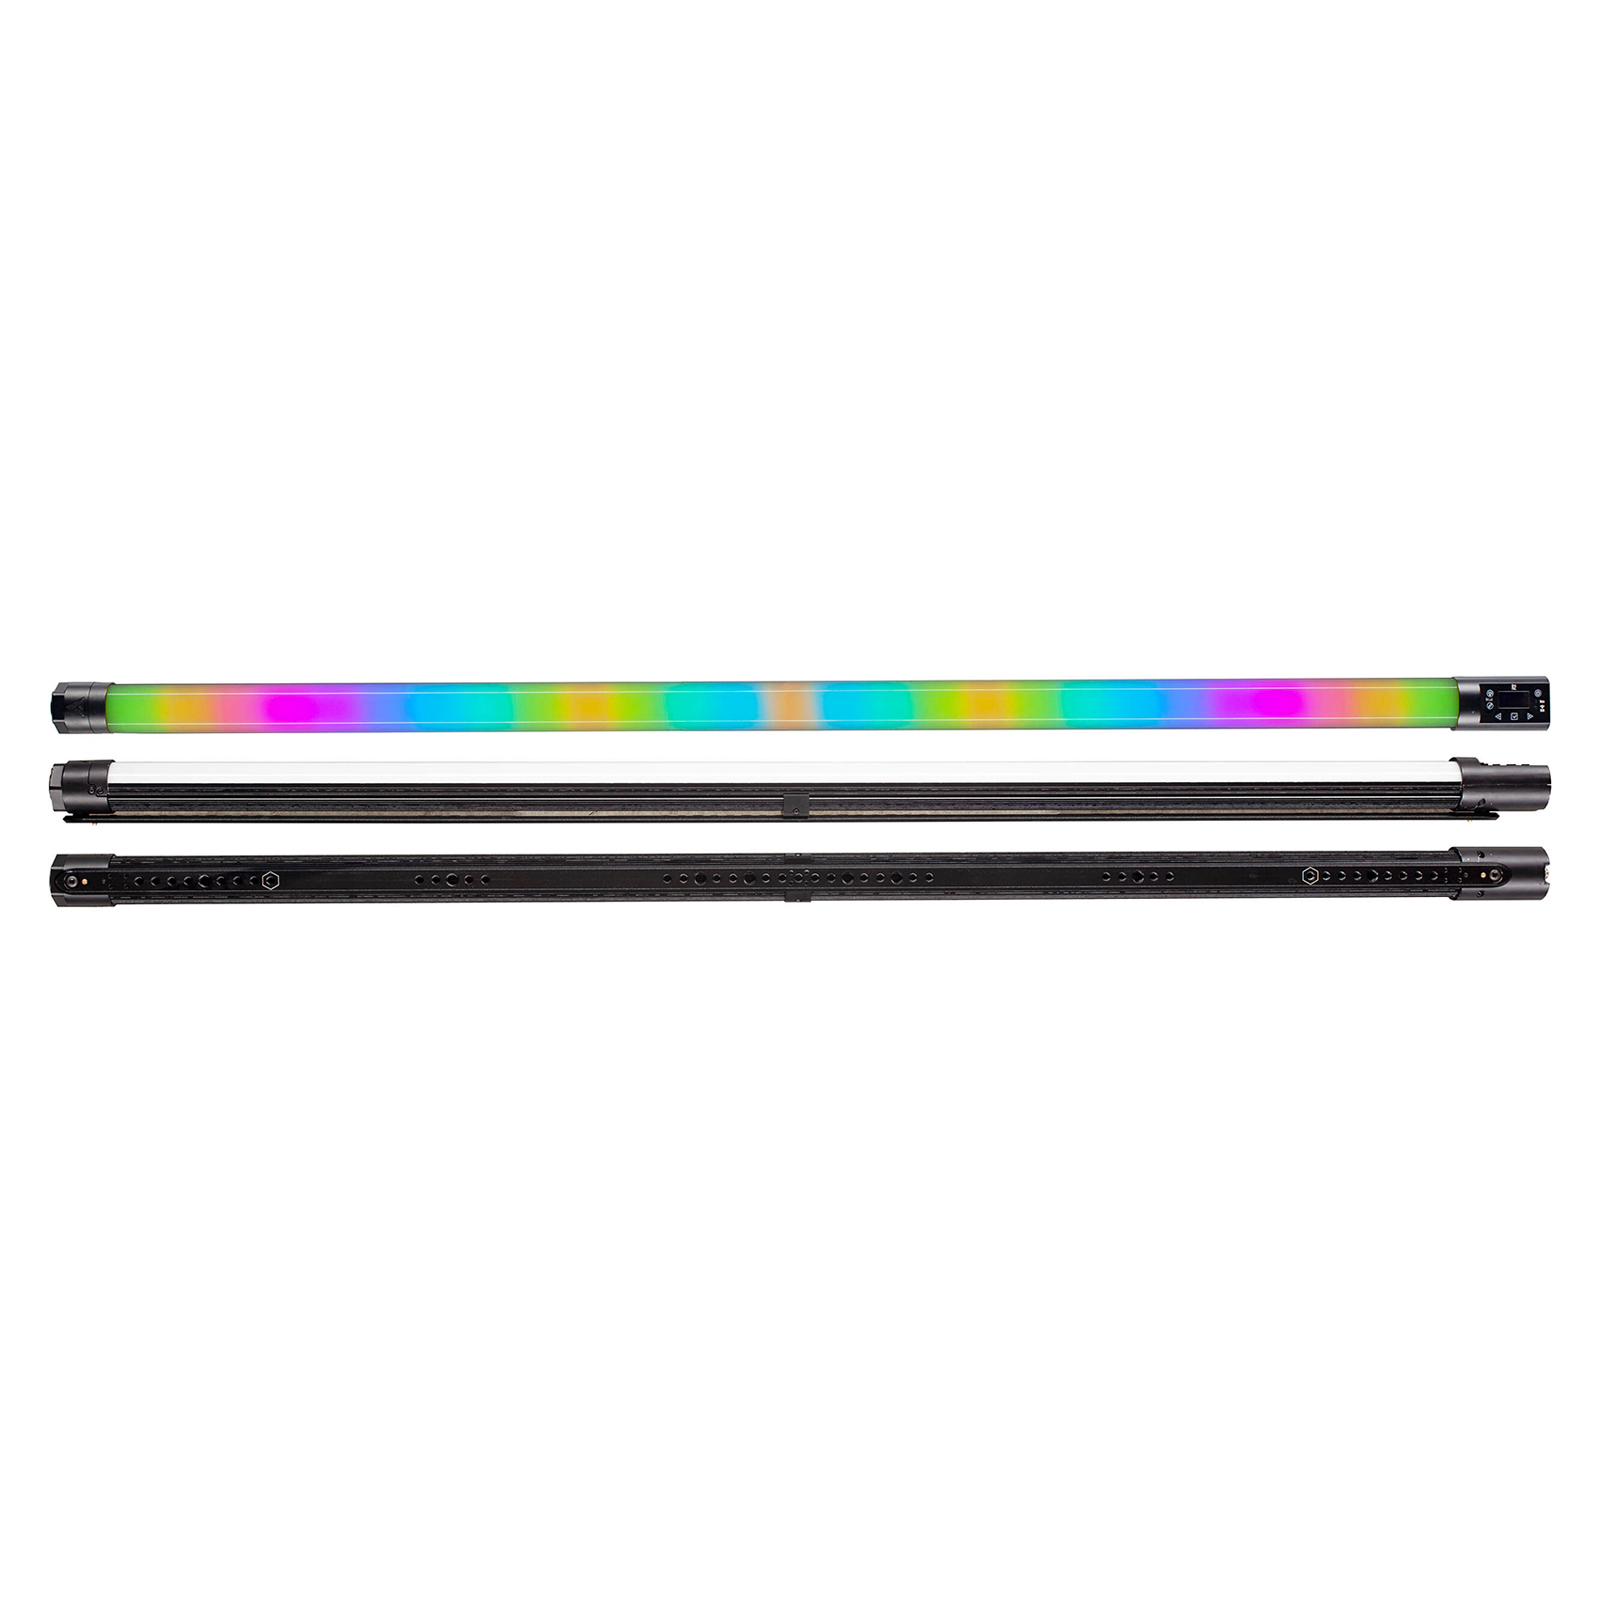 Image of Quasar Science Rainbow2100W linear LED light with multipixel RGBX color system